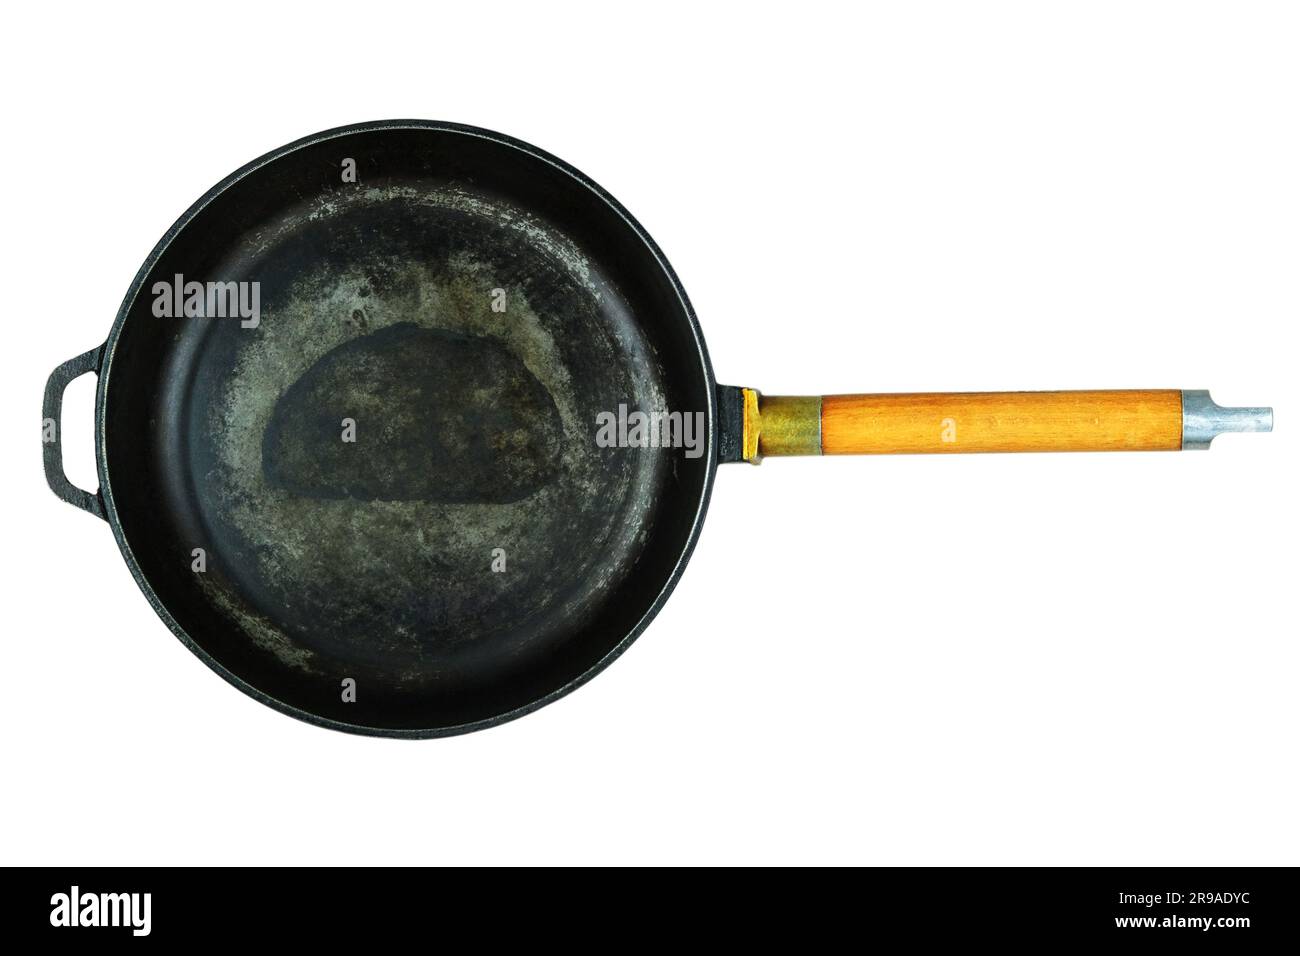 Cast iron pan.  Pan was used. Cookware isolated on white background. Top view. Stock Photo